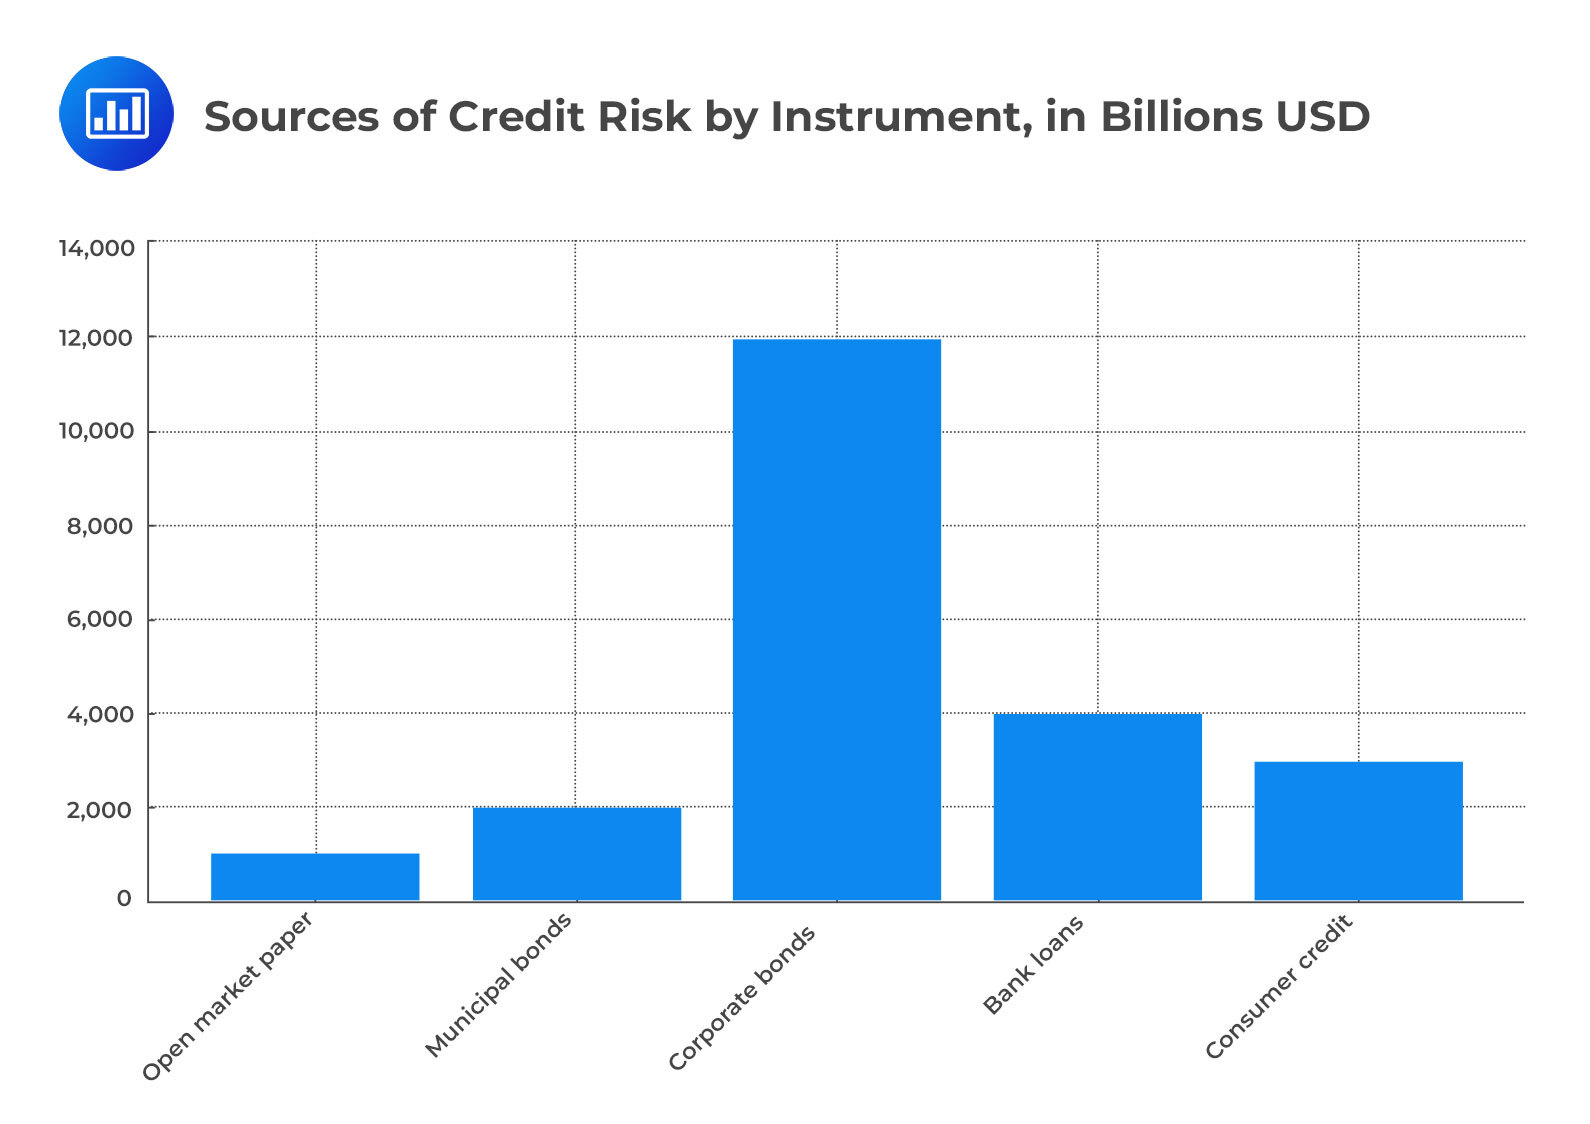 Sources of Credit Risk by Instrument